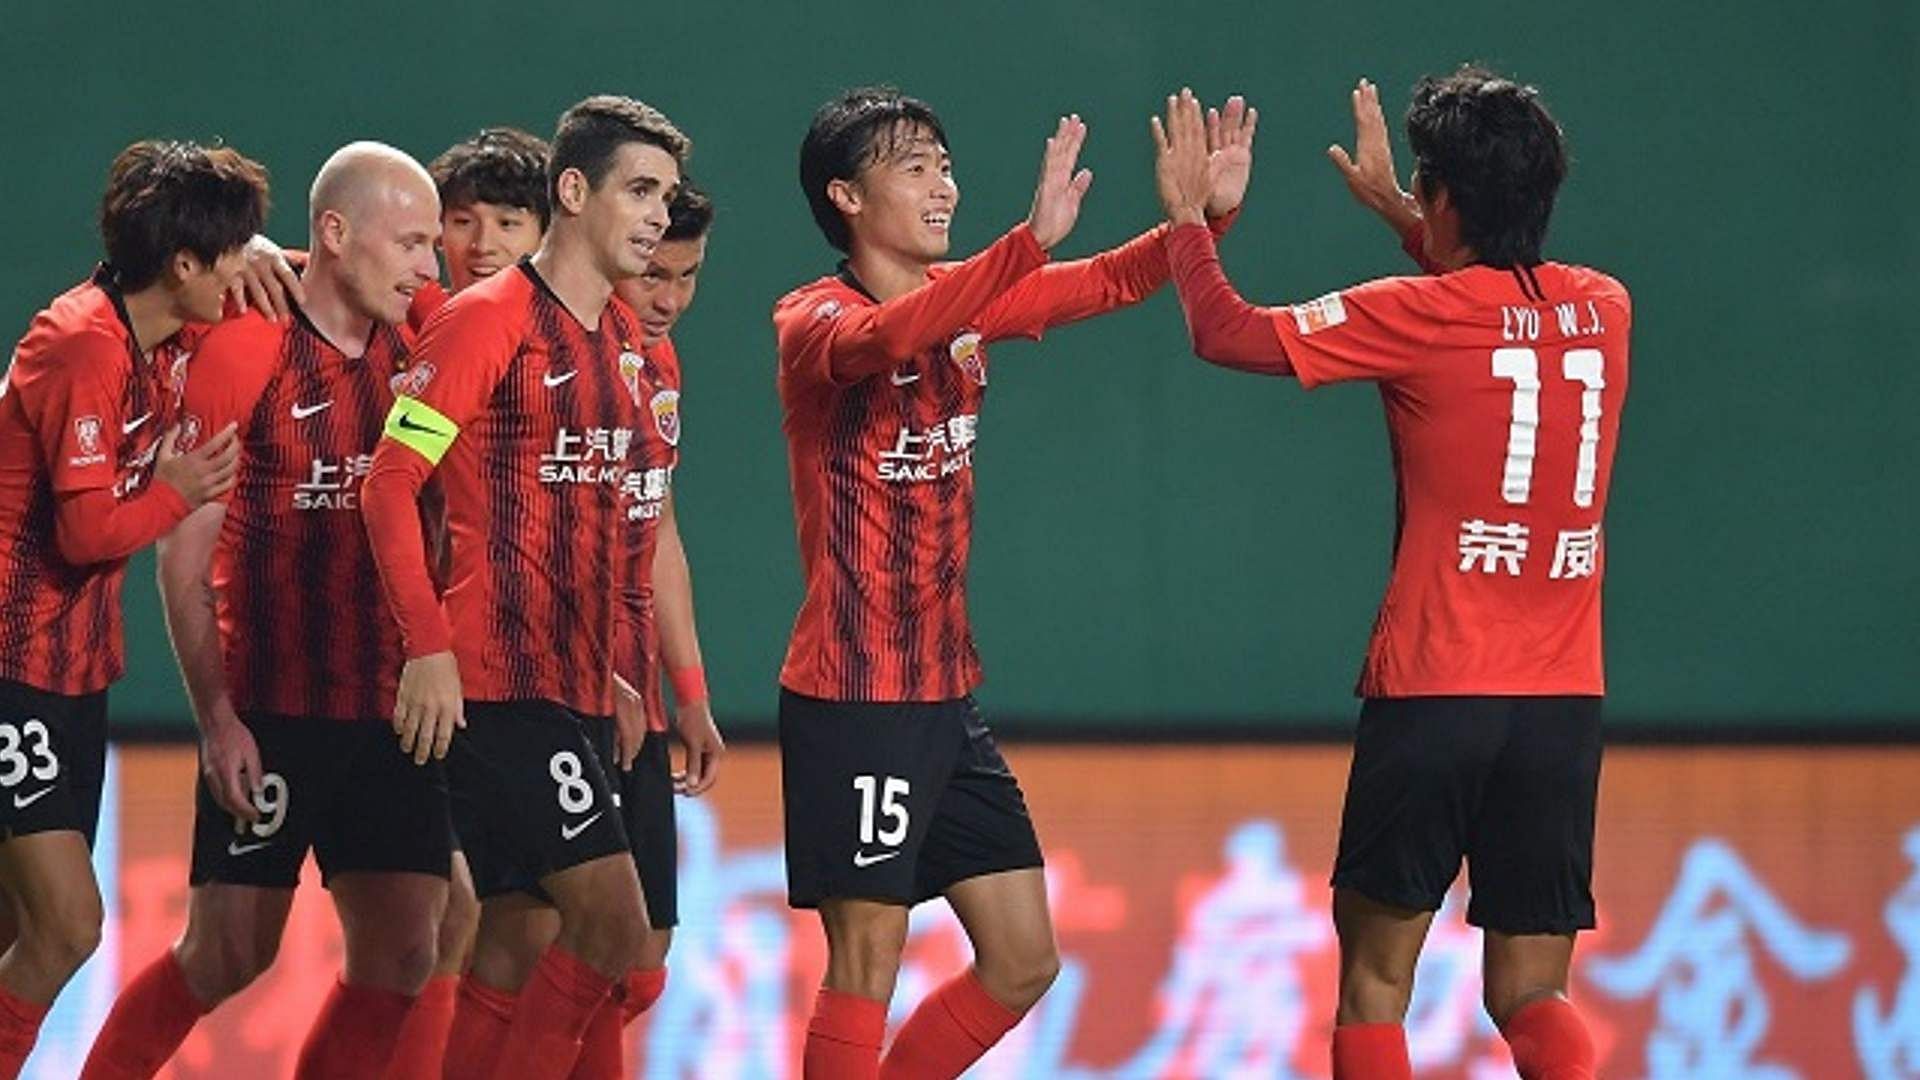 Shanghai Port and Henan Songshan Longmen square off in the Chinese Super League on Wednesday